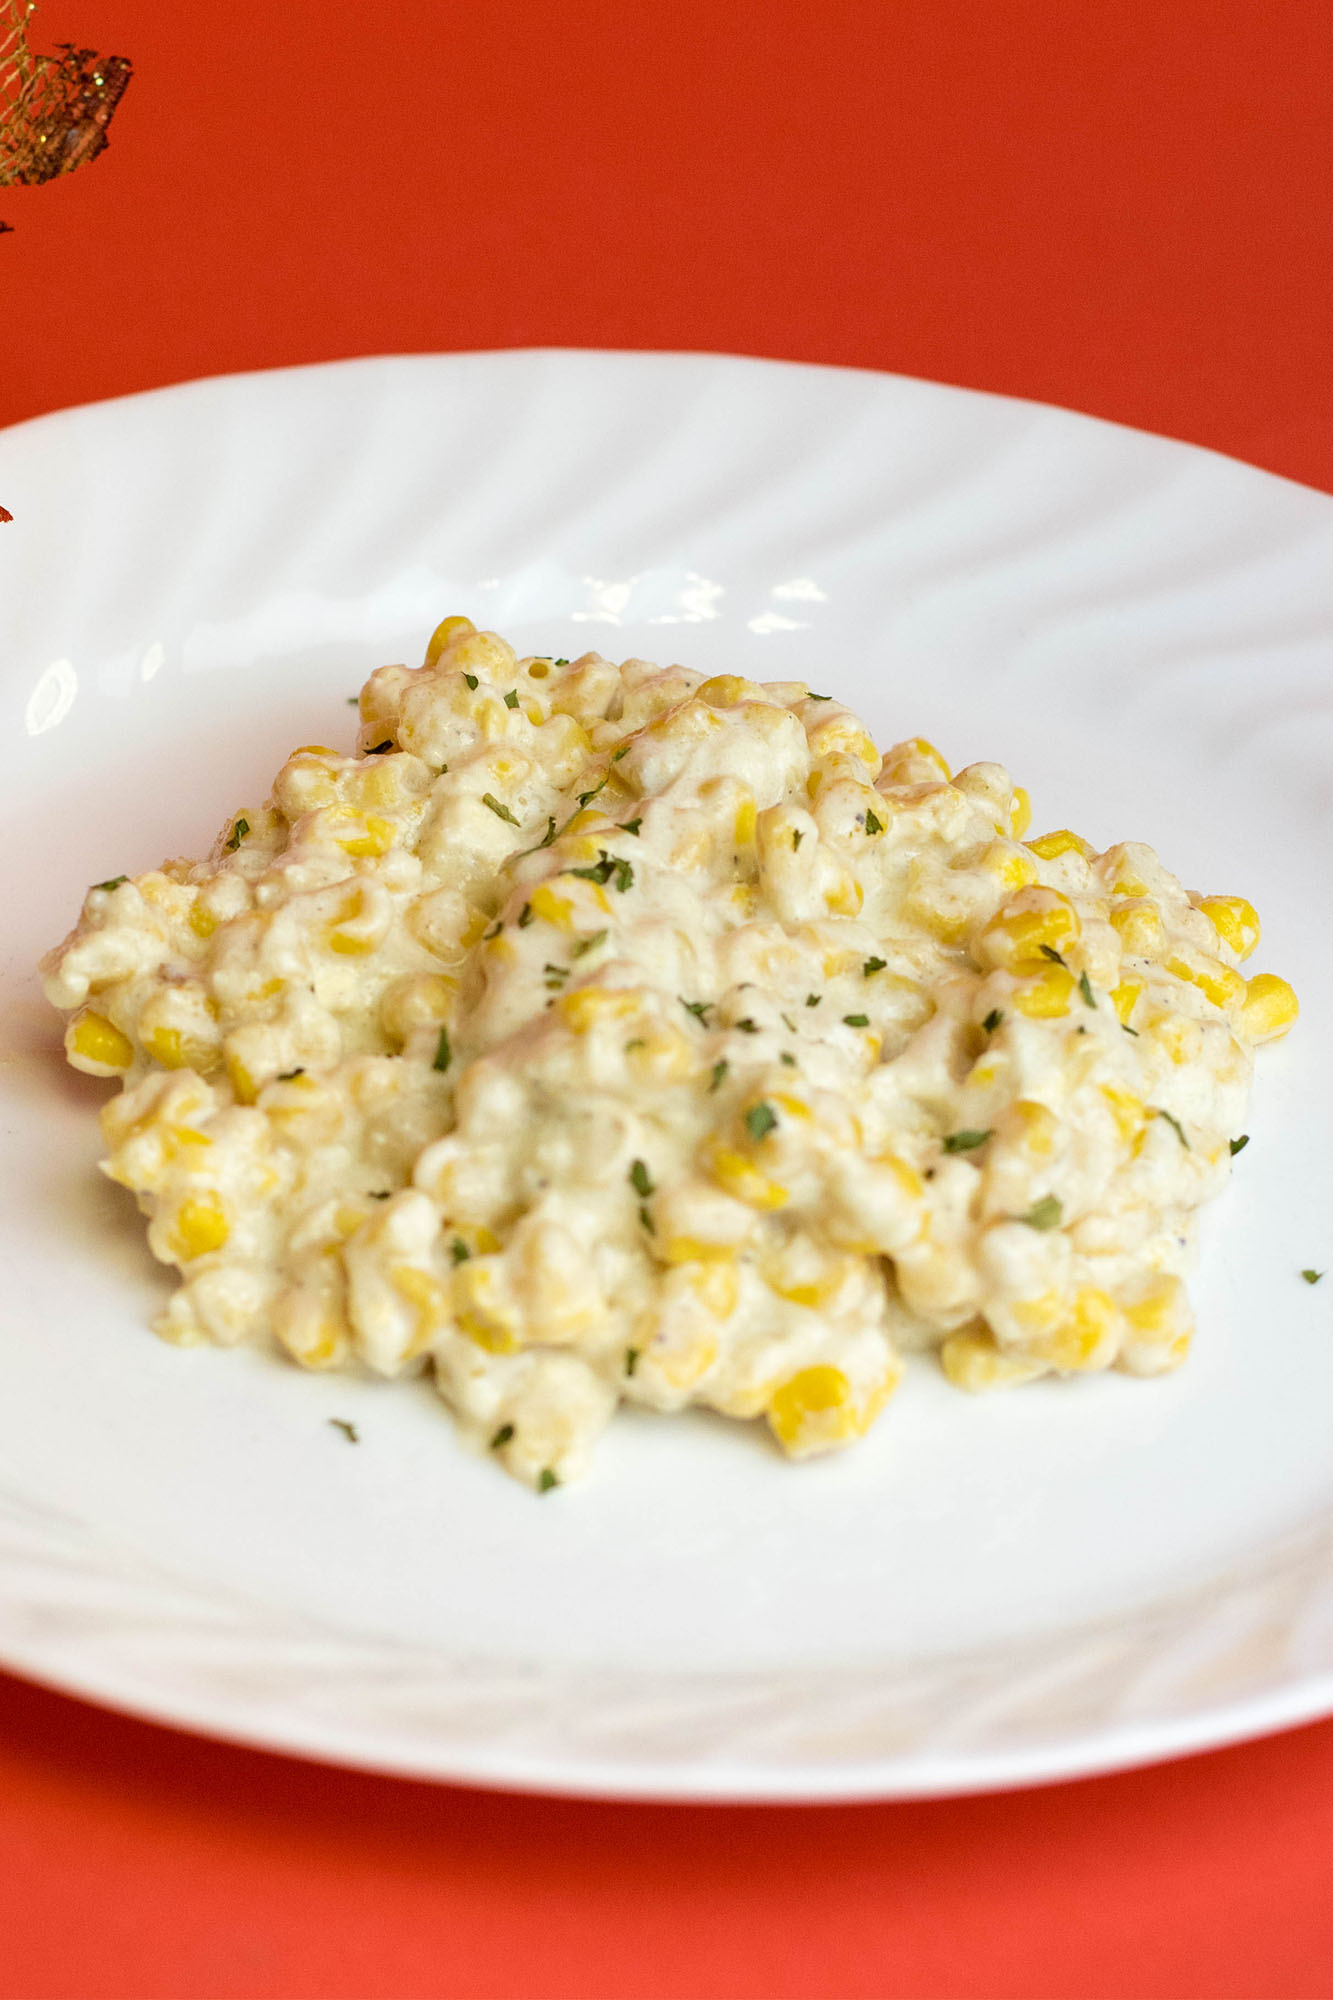 Creamed corn on a white plate laying on a flat red background.